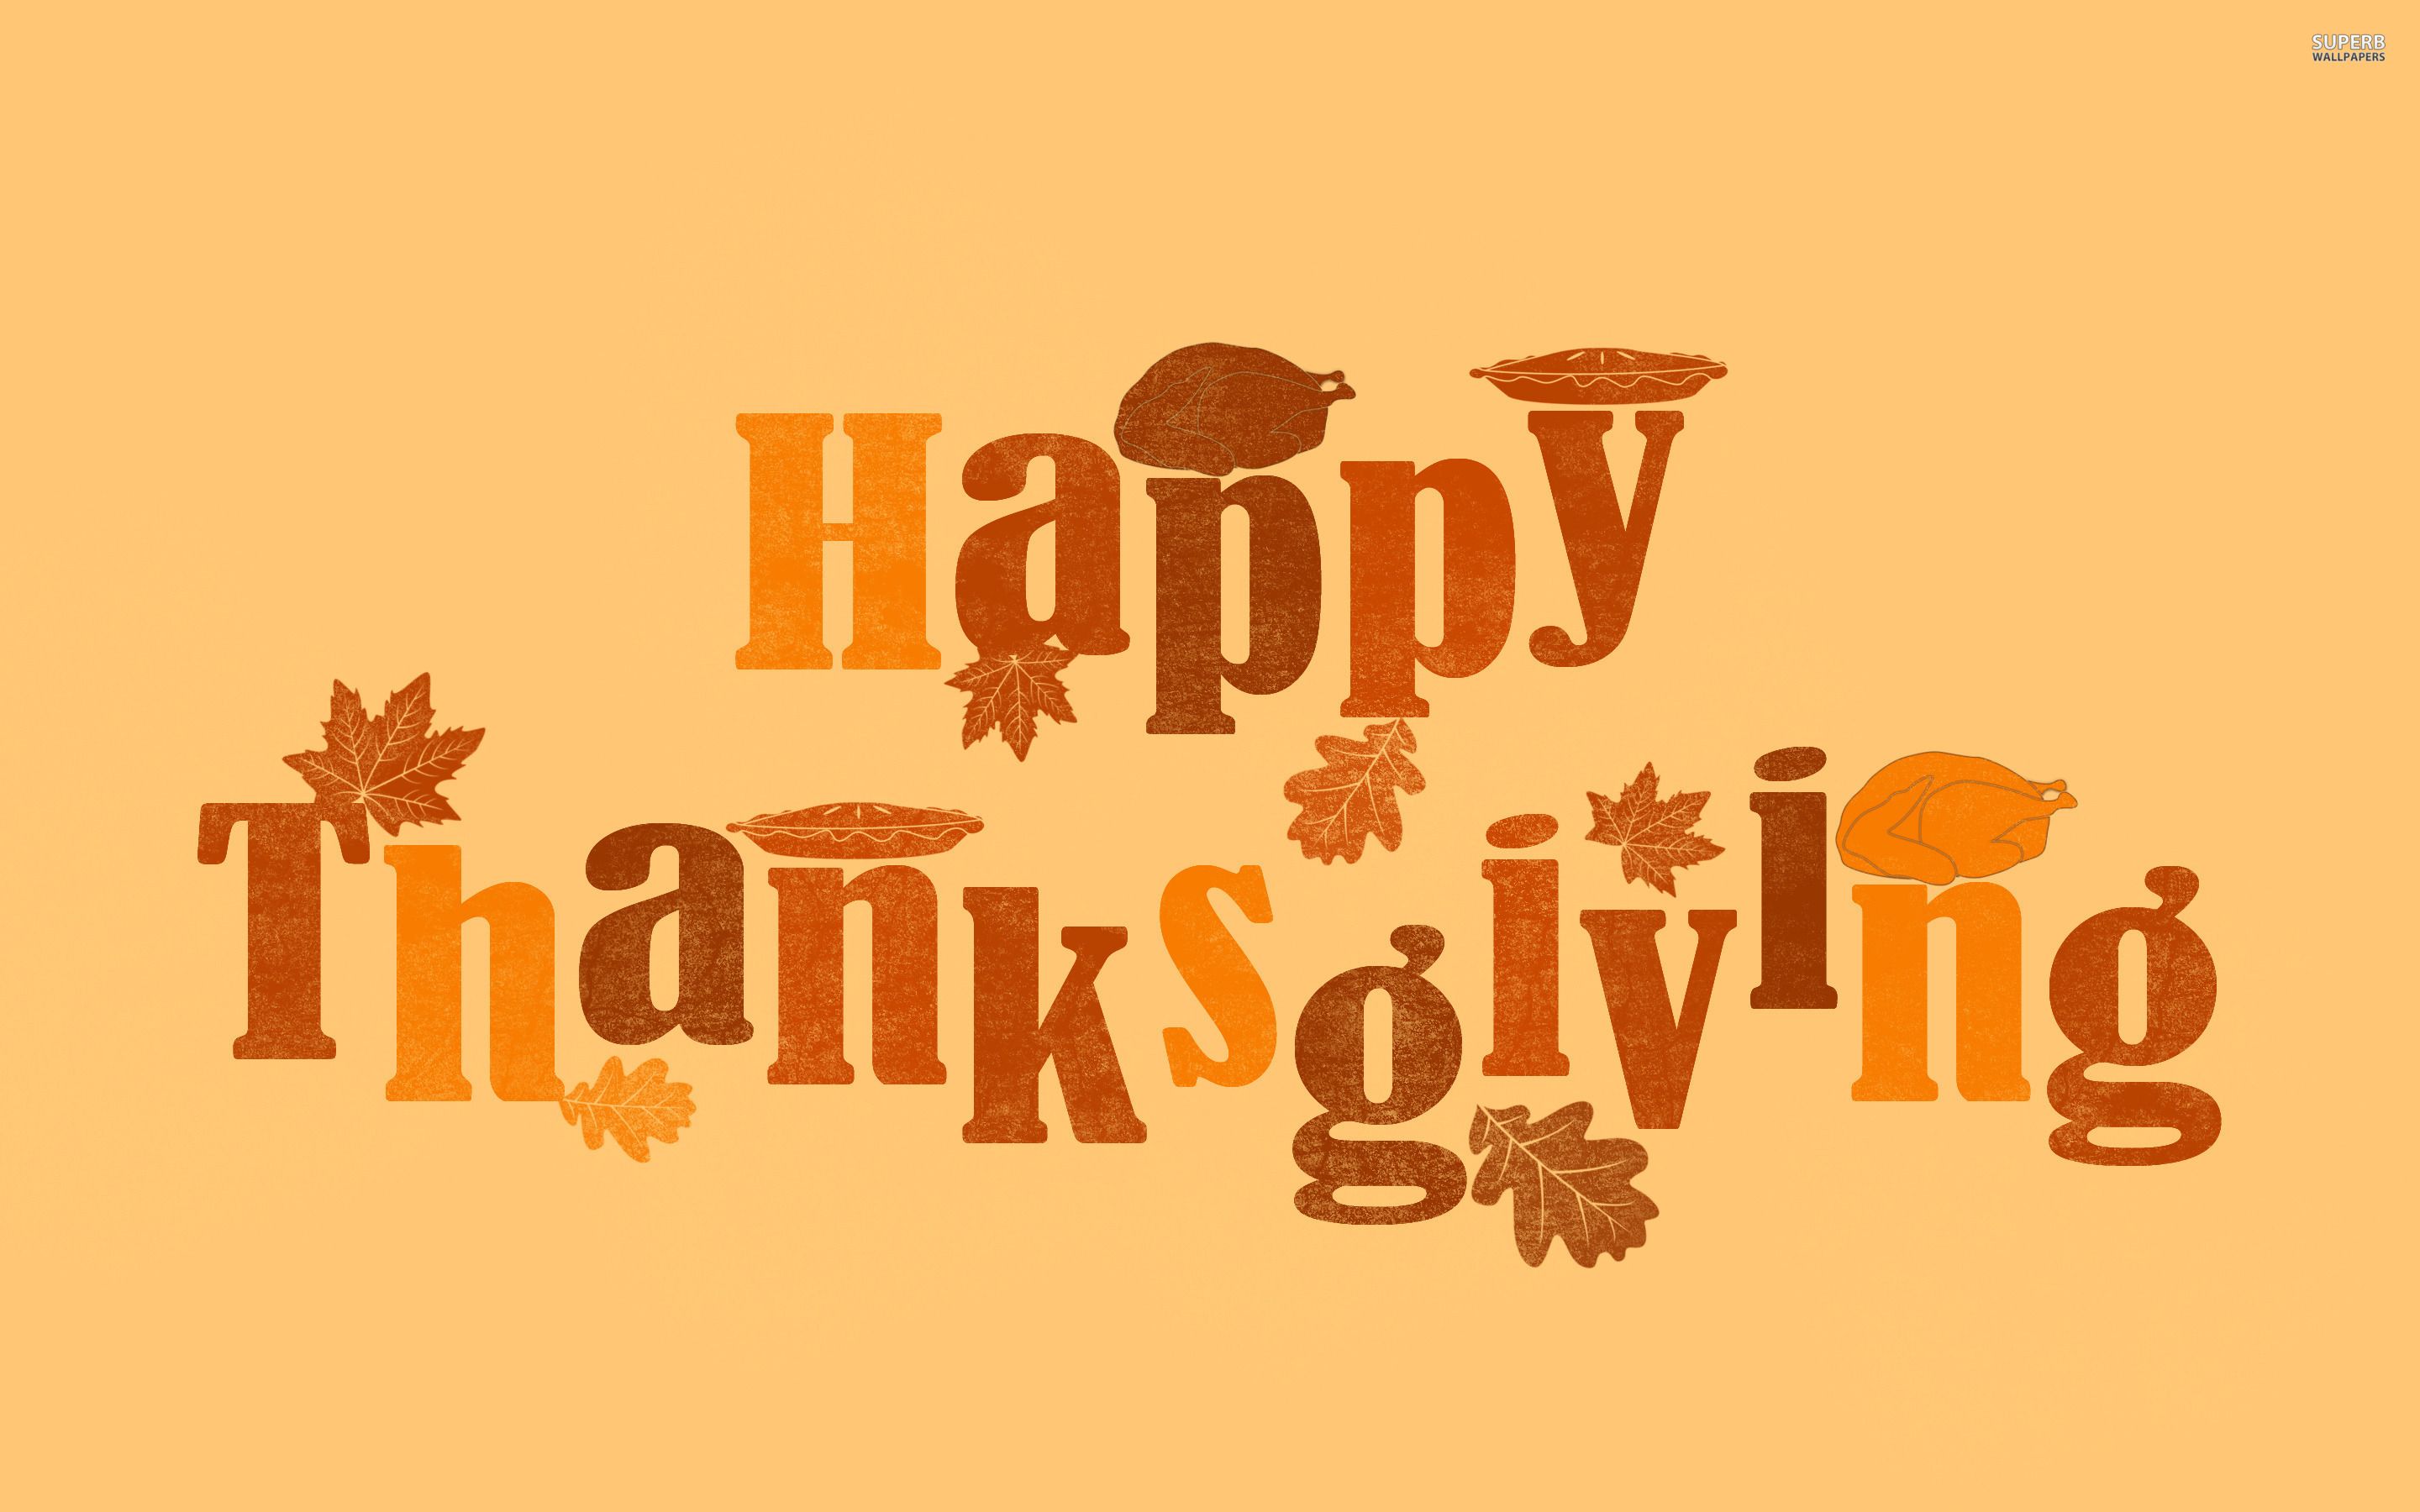 Happy Thanksgiving Desktop and mobile wallpaper Wallippo